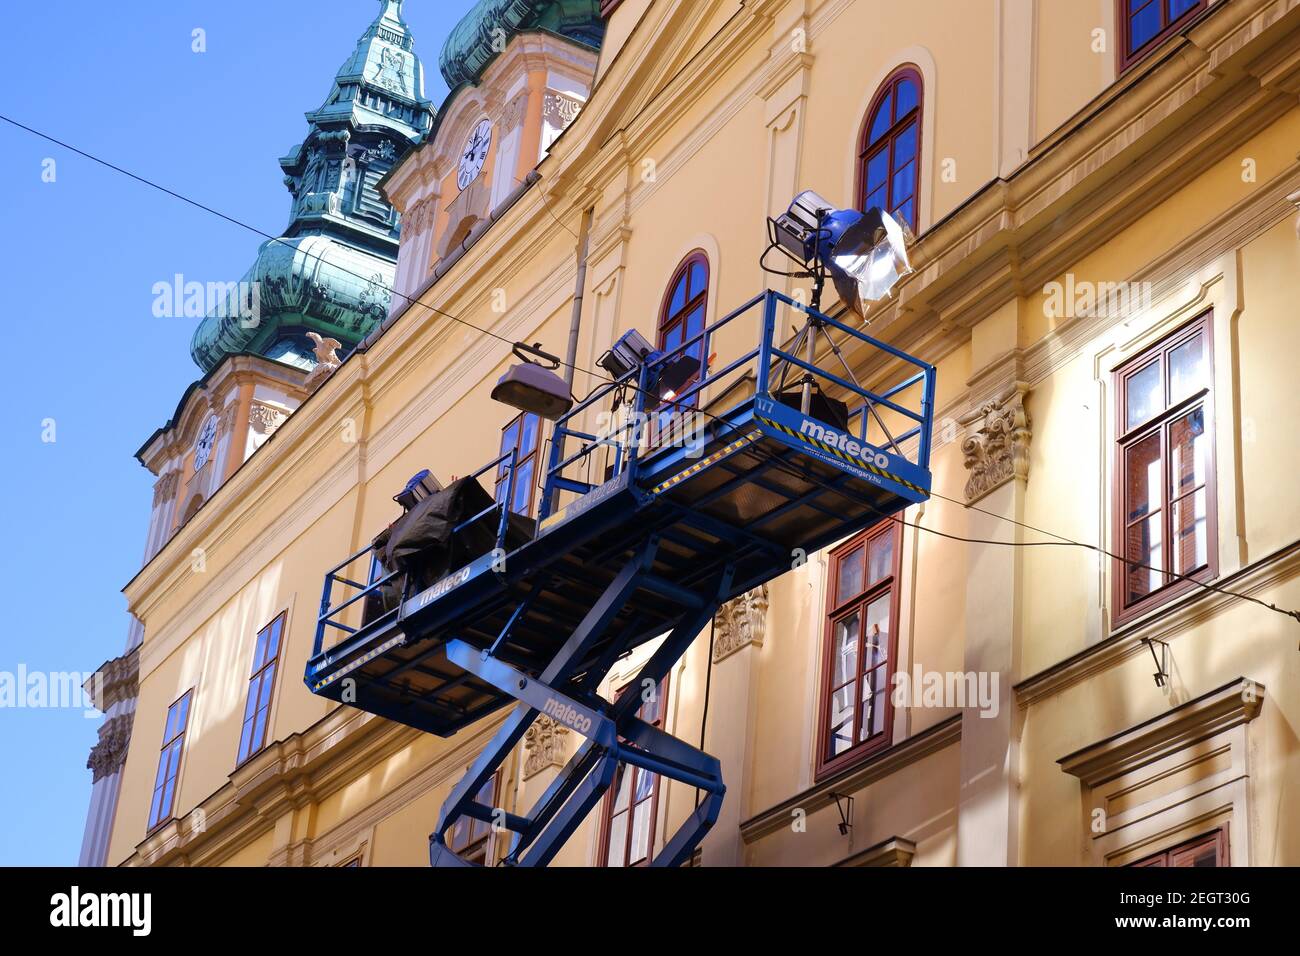 Budapest, Hungary - February 18, 2021: shooting scene with a crane with cameras and lighting in front of a downtown house on the street Stock Photo